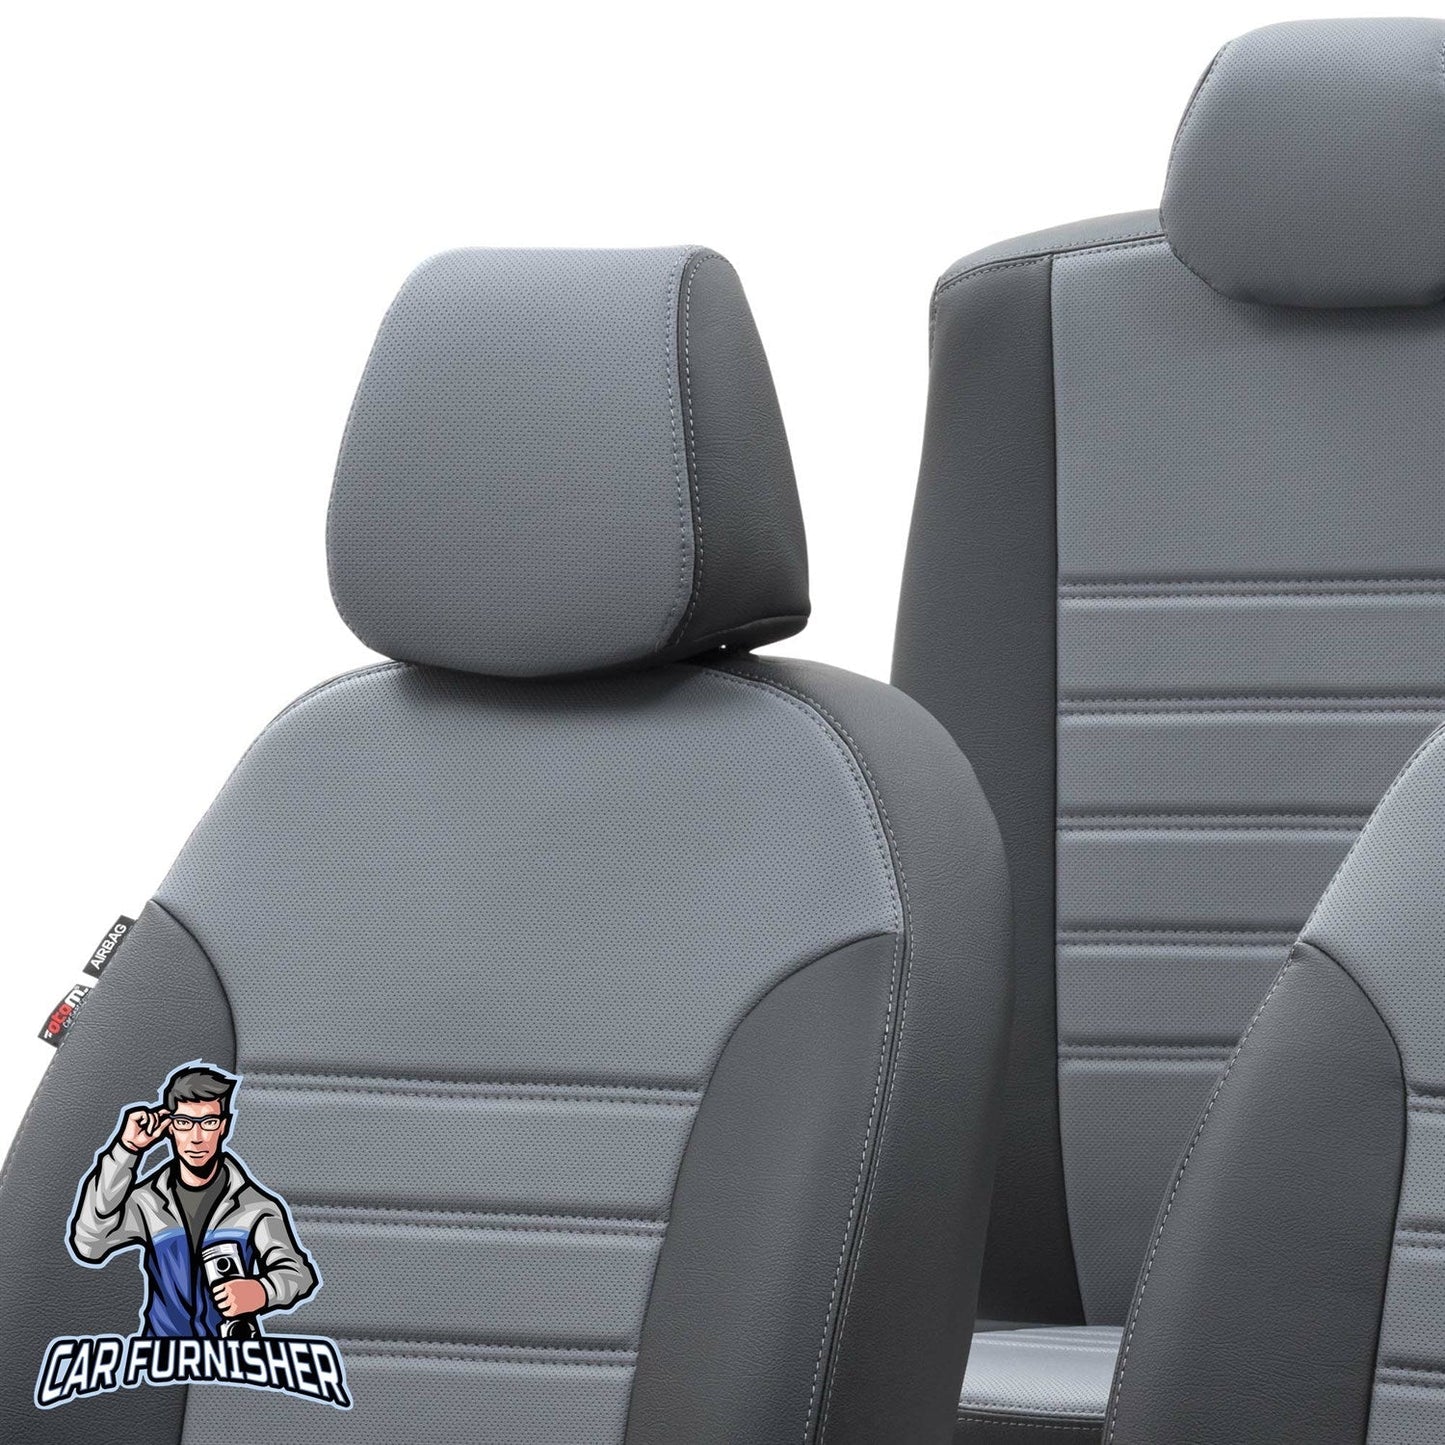 Ssangyong Kyron Seat Covers Istanbul Leather Design Smoked Black Leather